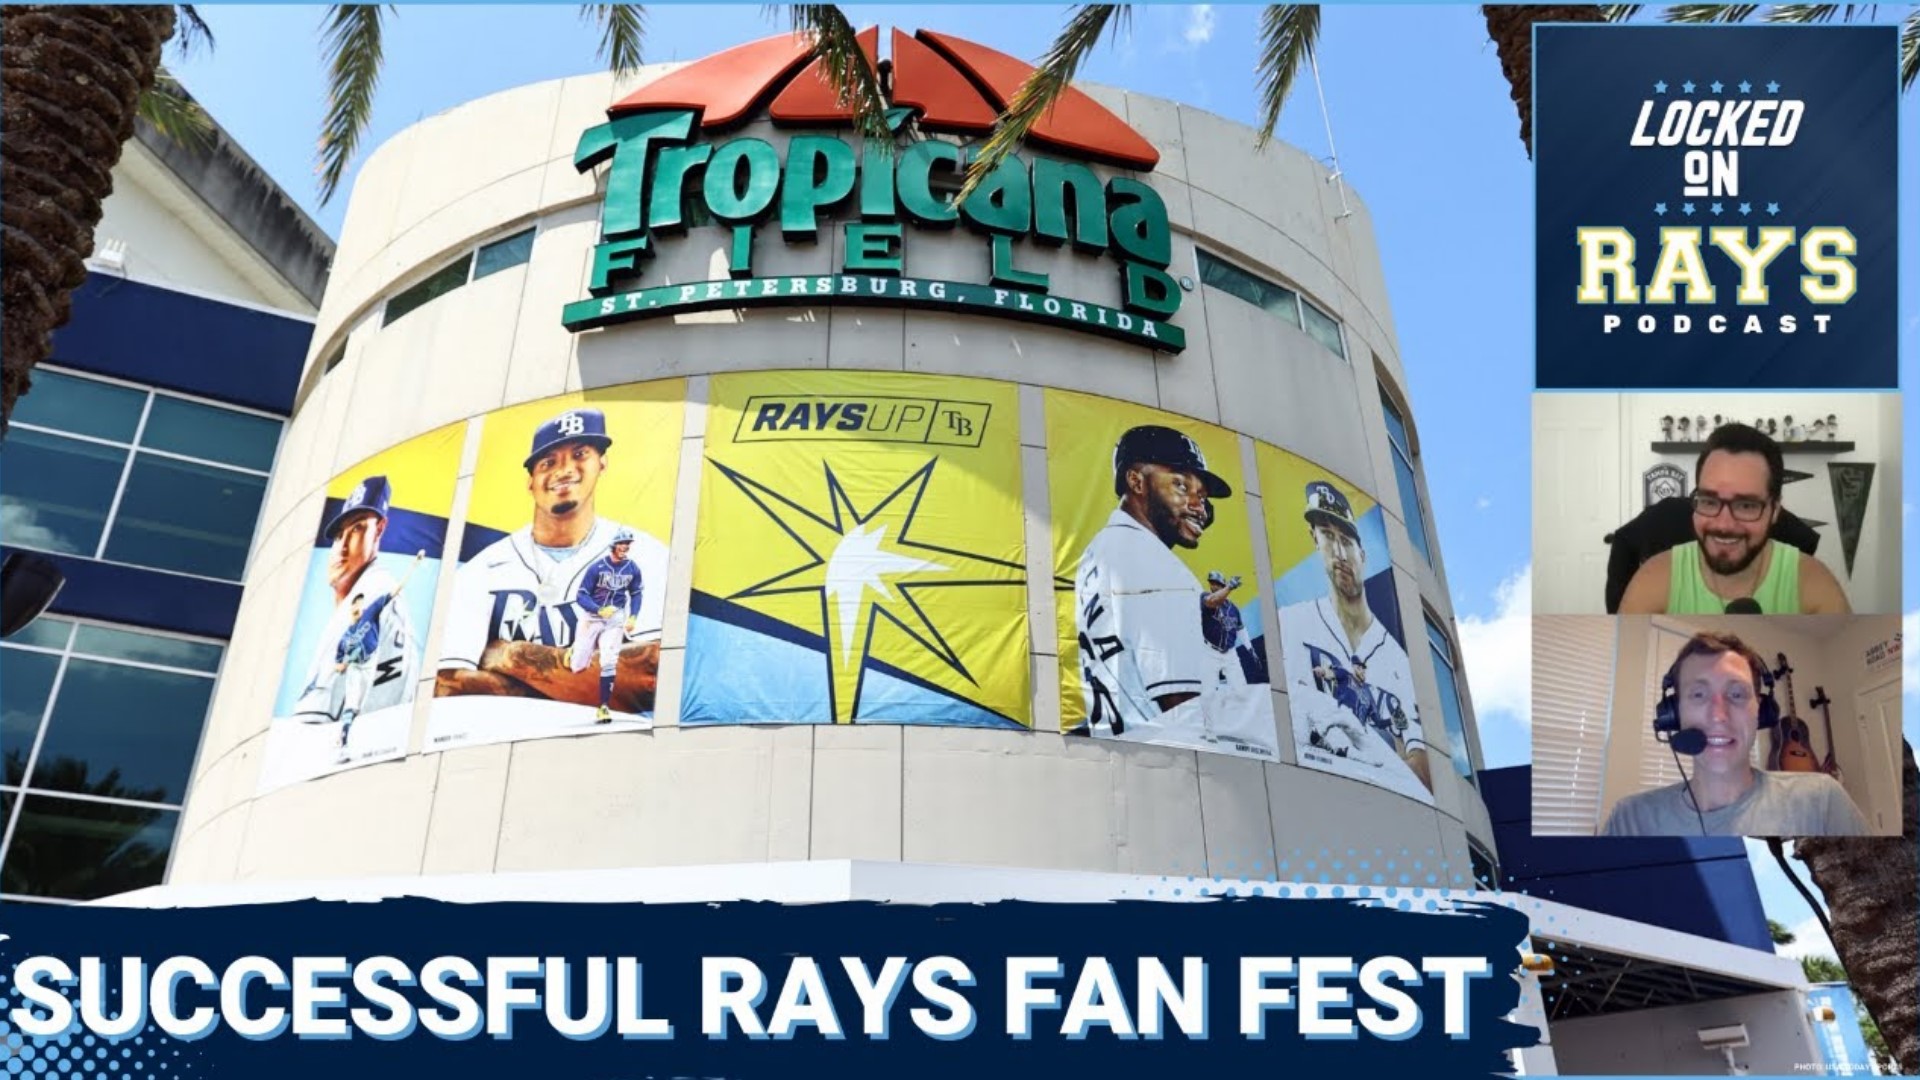 The Tampa Bay Rays opened Tropicana Field's doors on Saturday for their first Fan Fest since 2020 and it seems the fandom had a great time.